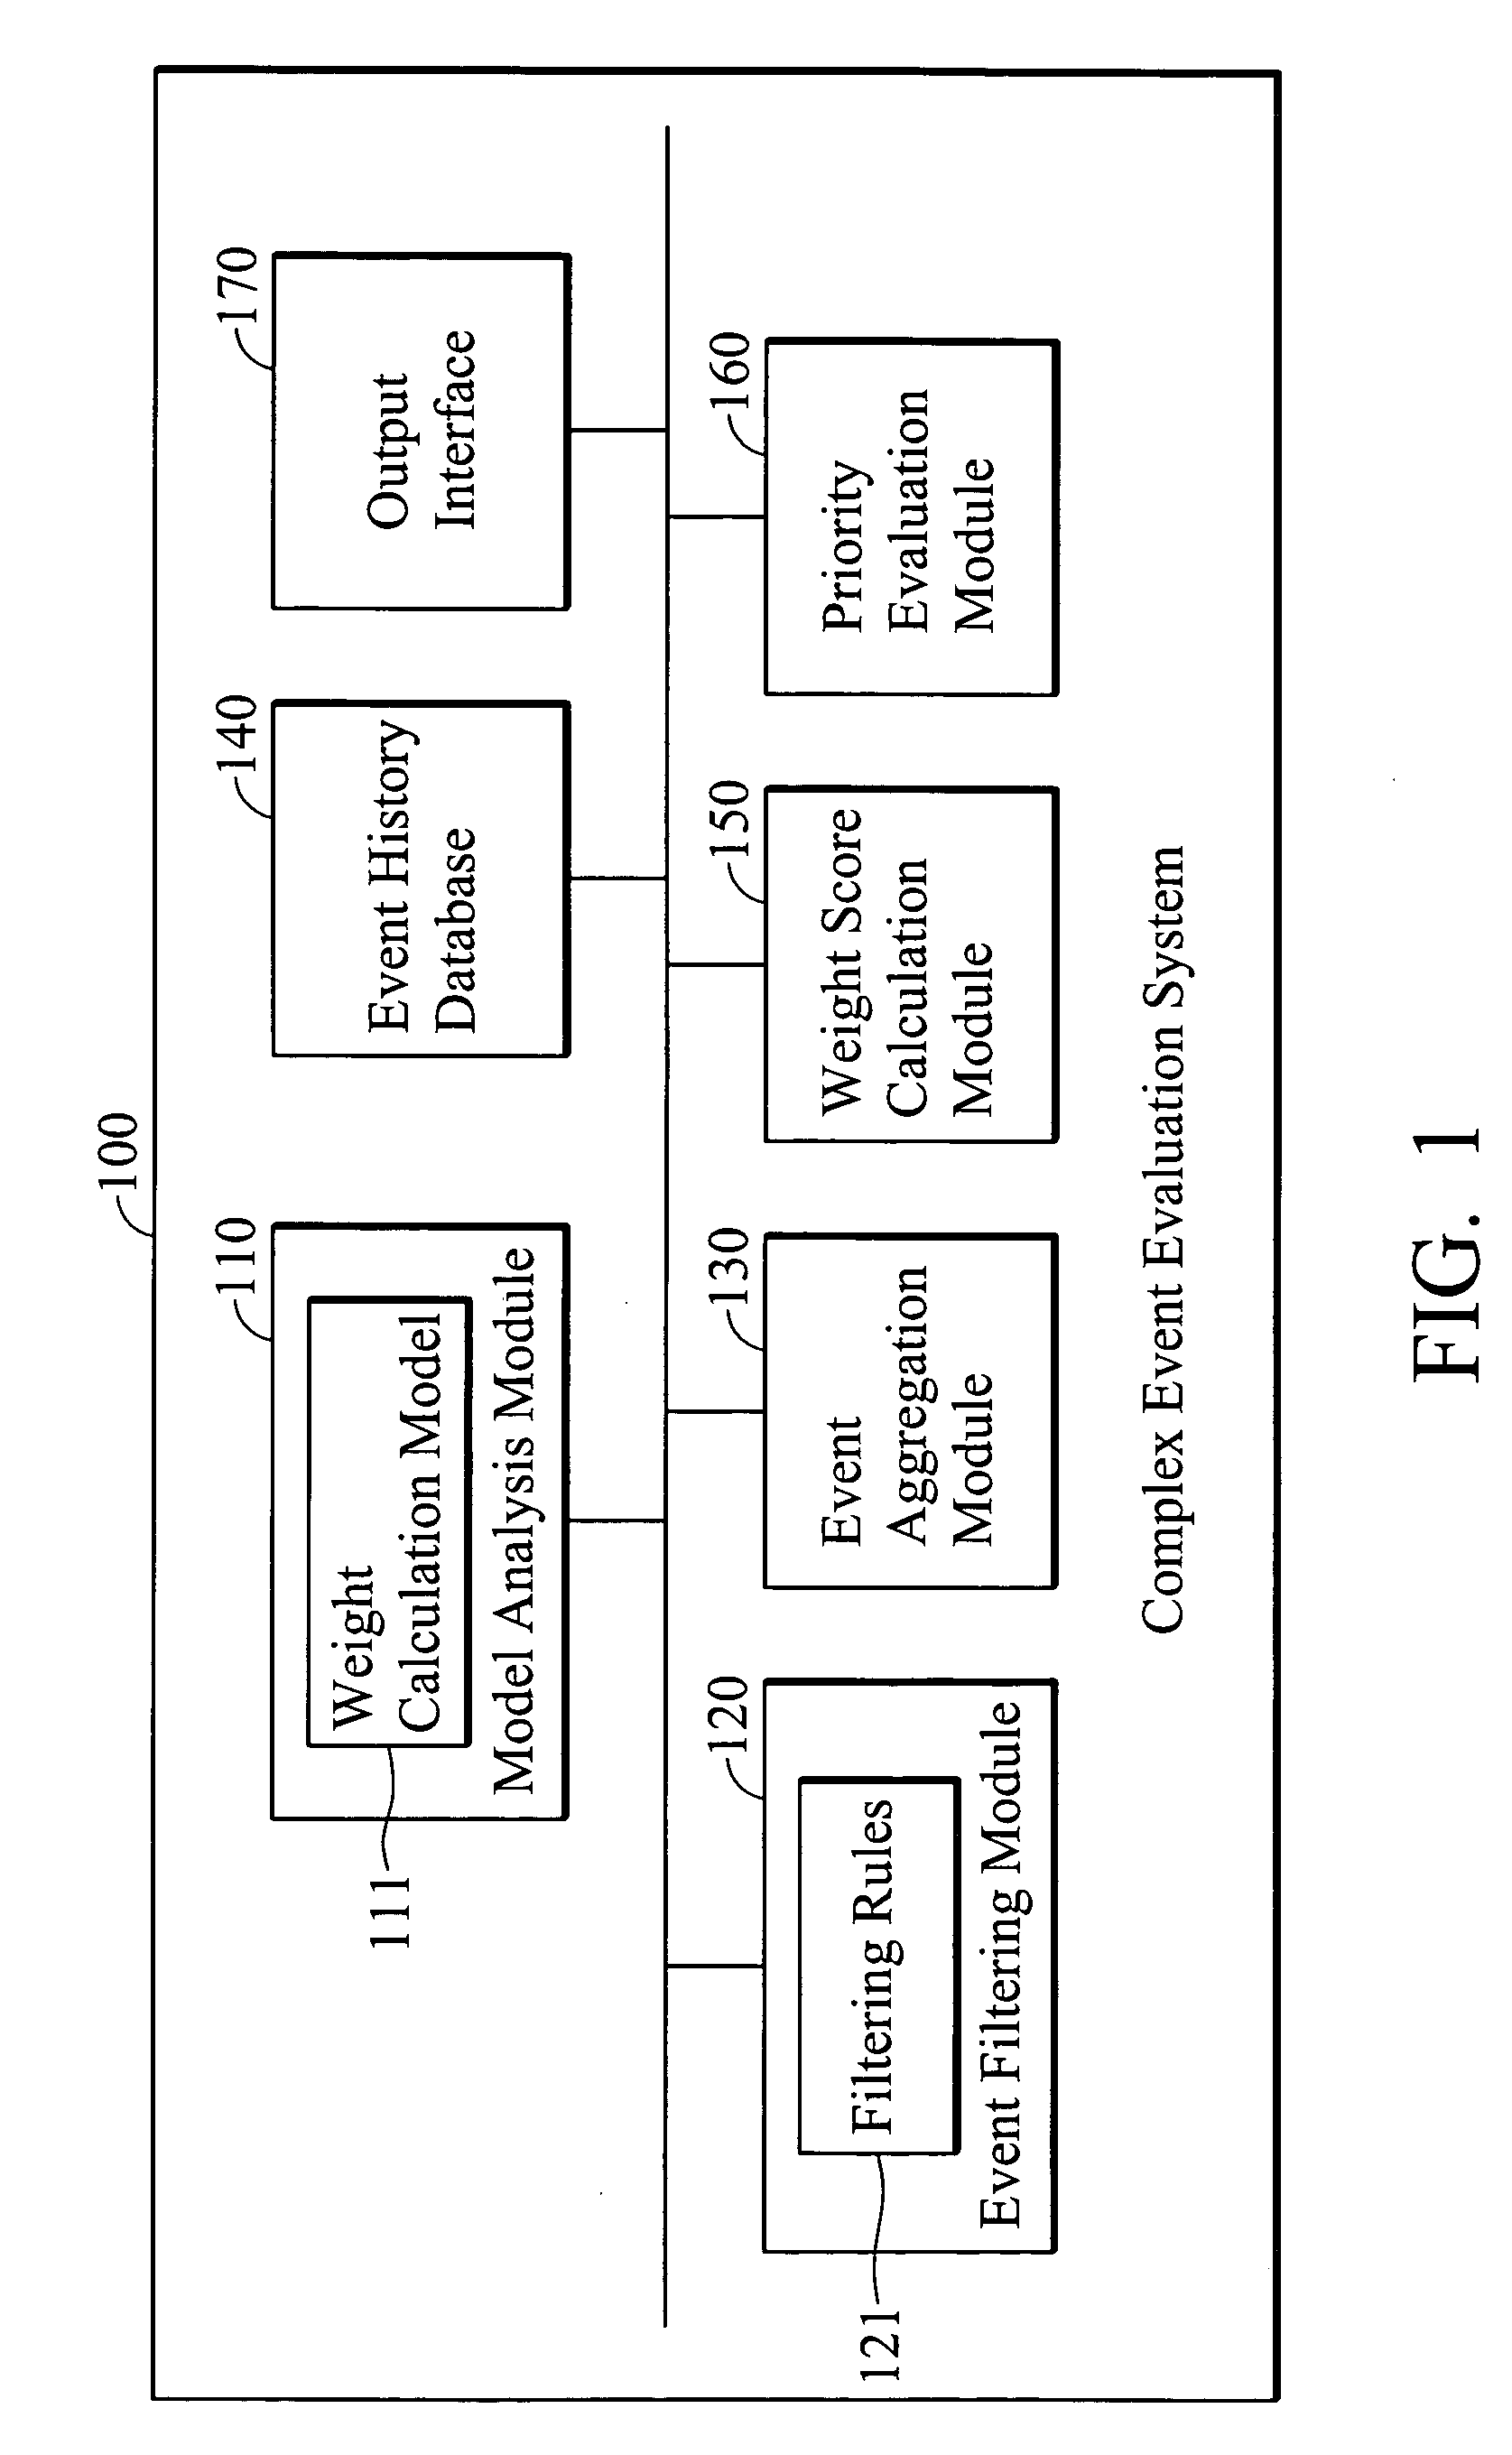 Complex event evaluation systems and methods